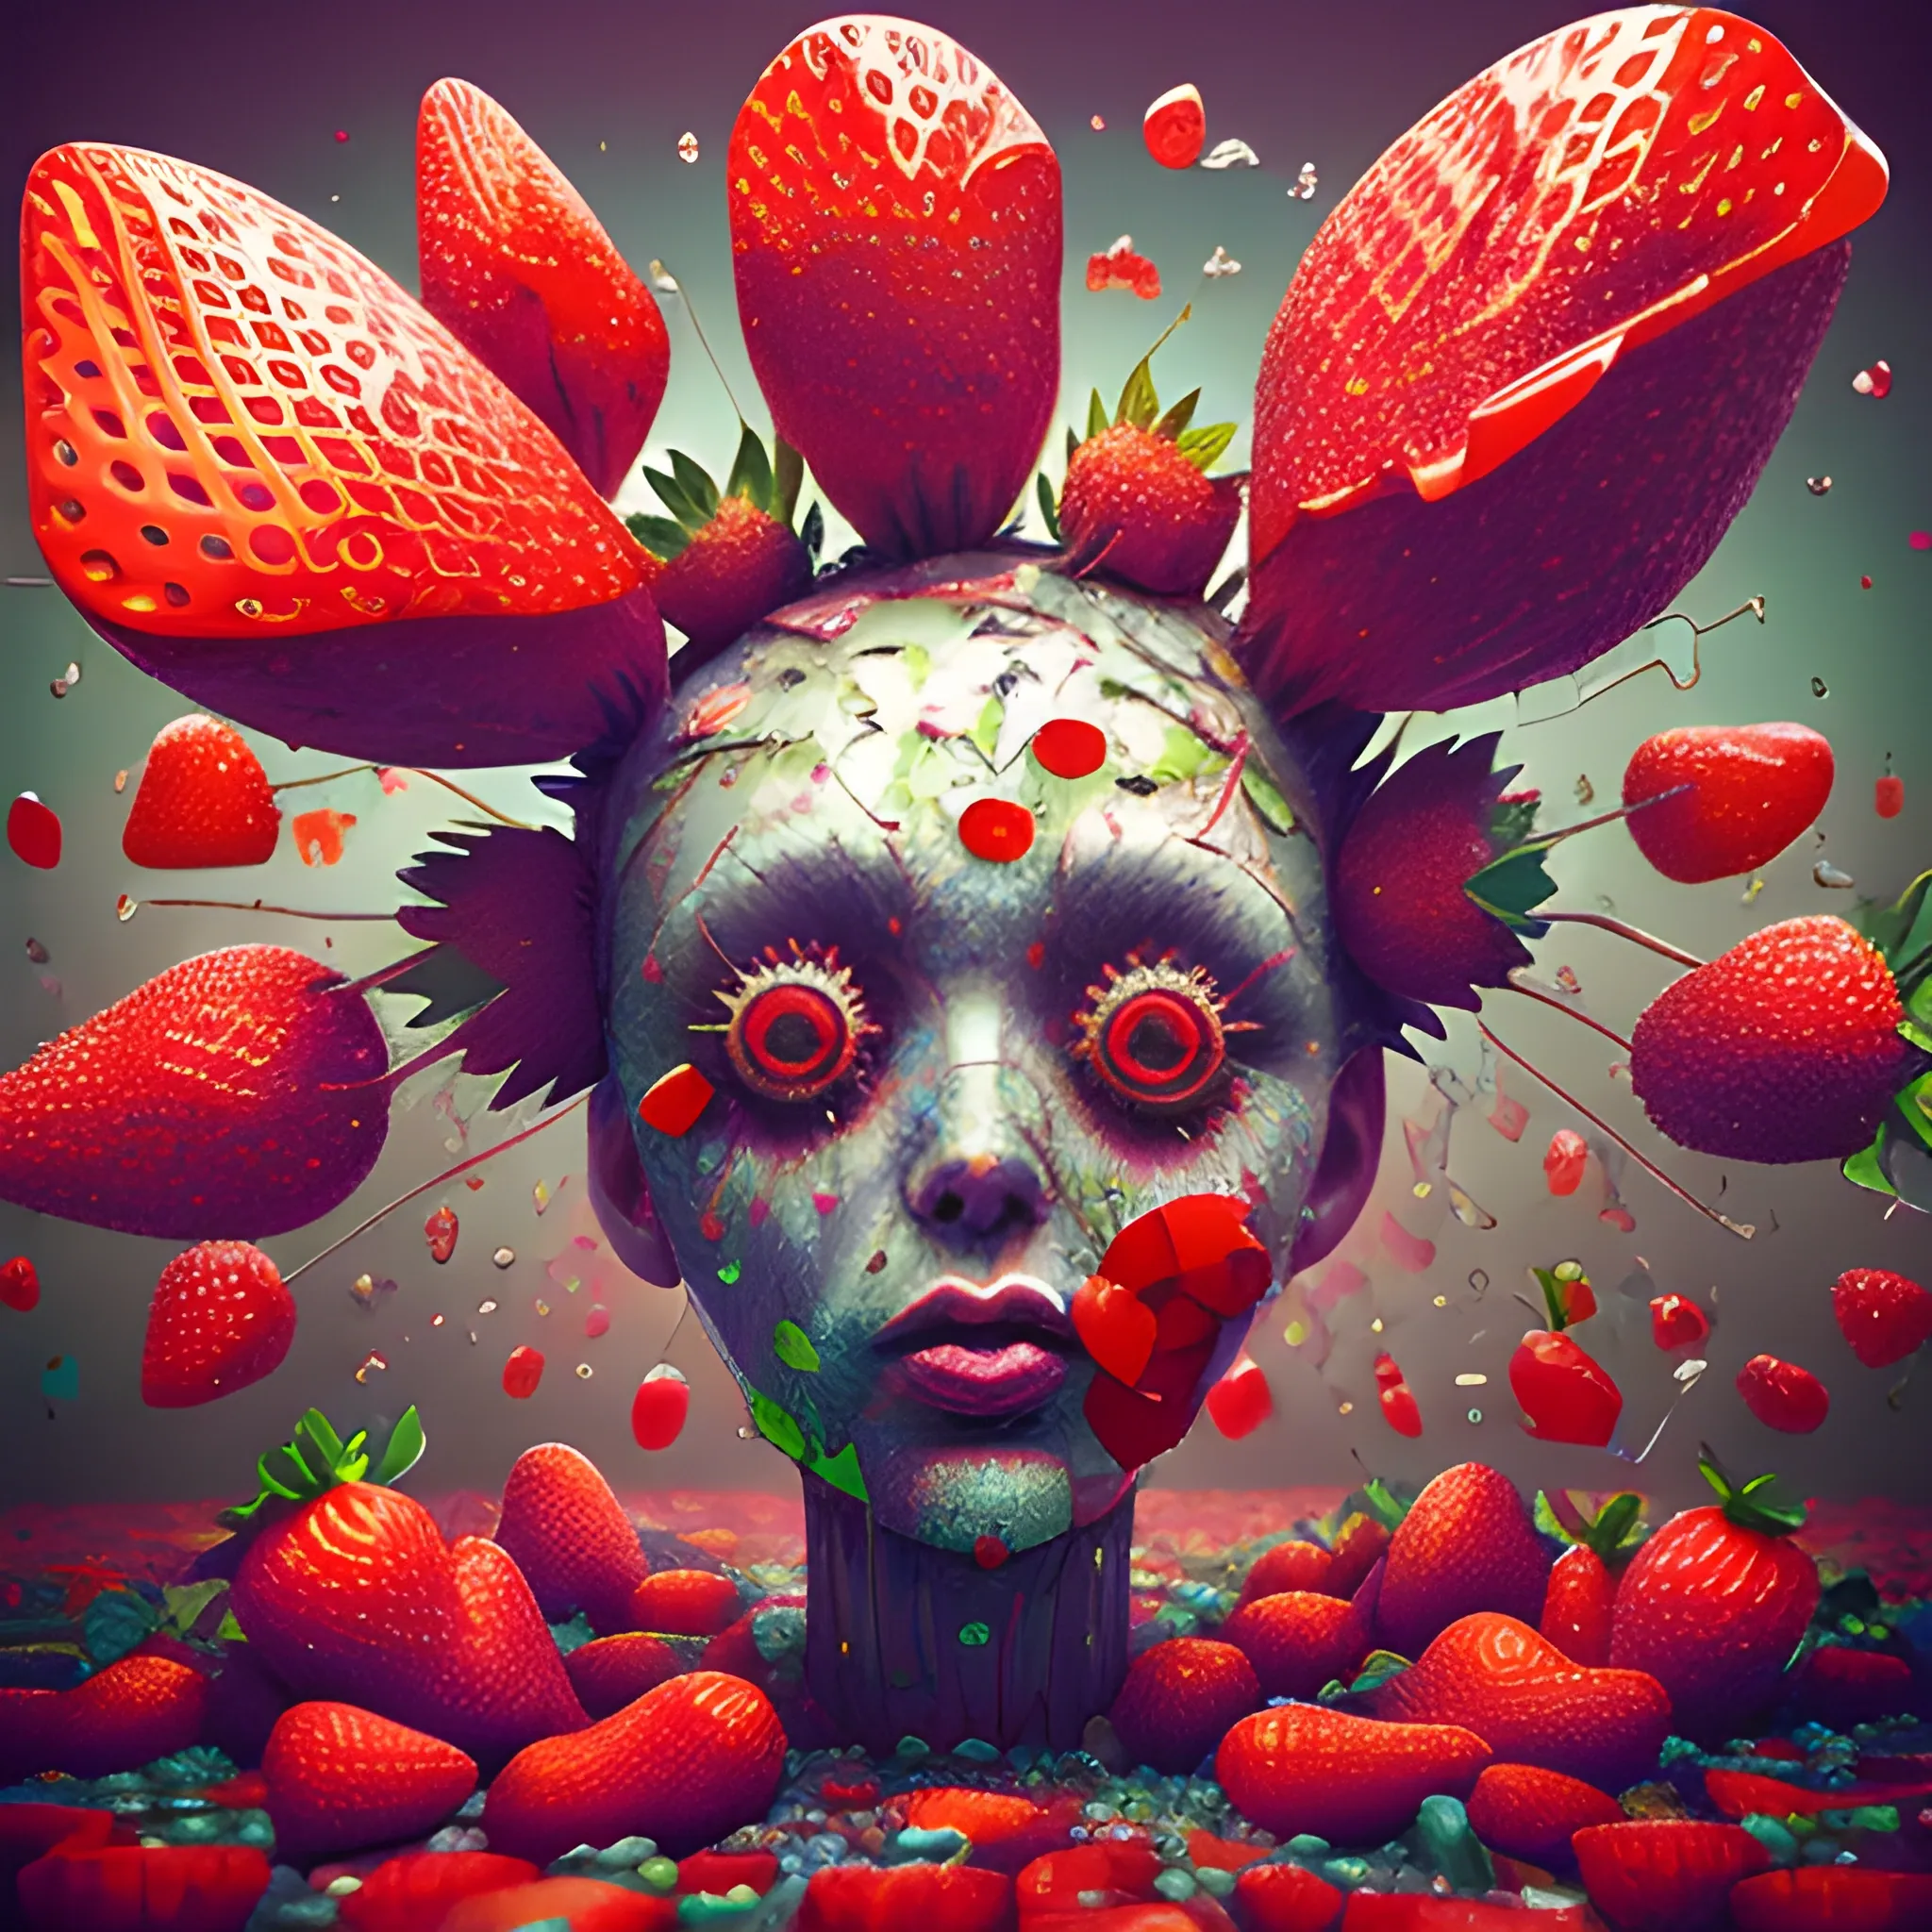 make a sculpture of many crystal crazy strawberries with human face, poppies around, many broken glass in the air, saturated colors
surrealism, chaotic background, 3D, Trippy,  eerie atmosphere, close up, Oil Painting, aerial perspective